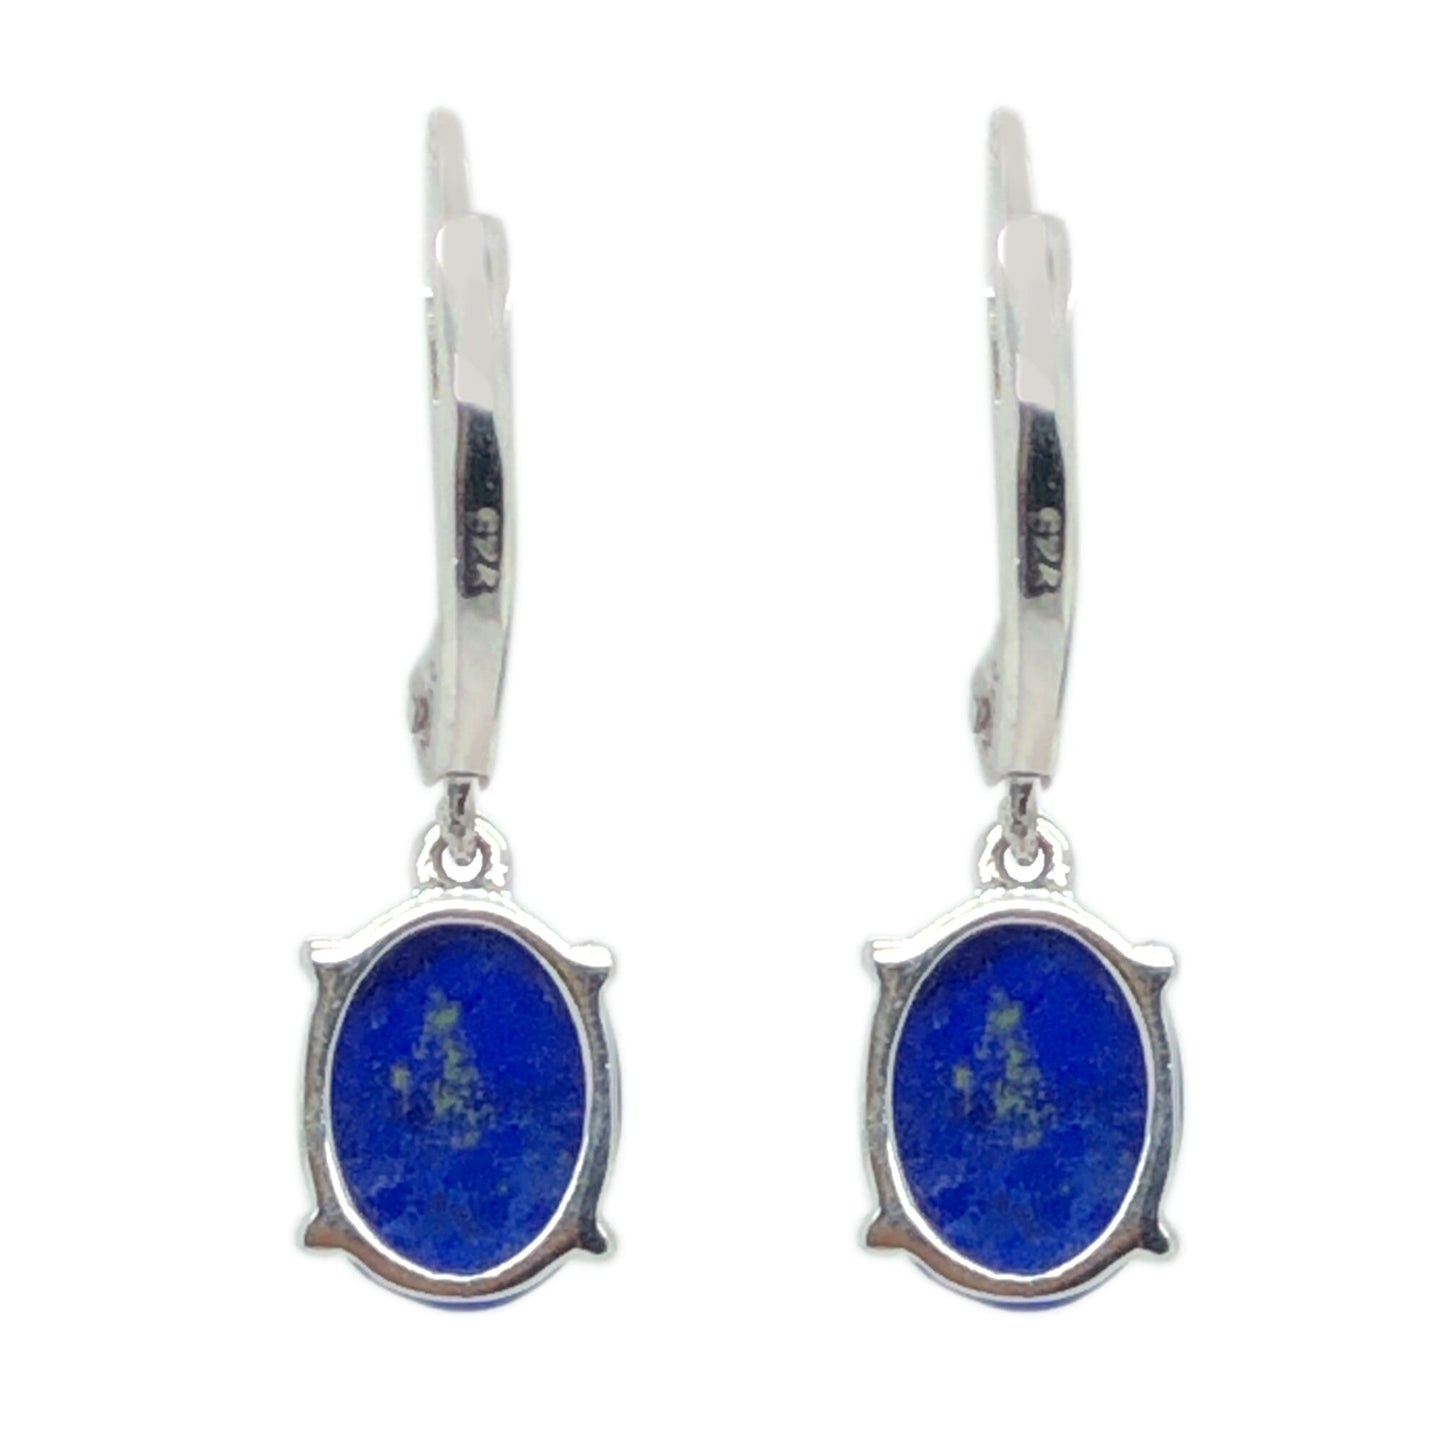 Natural Lapis Lazuli Gemstone Earrings, 925 Sterling Silver Dangle And Drop Earrings, Everyday Jewelry, Gift